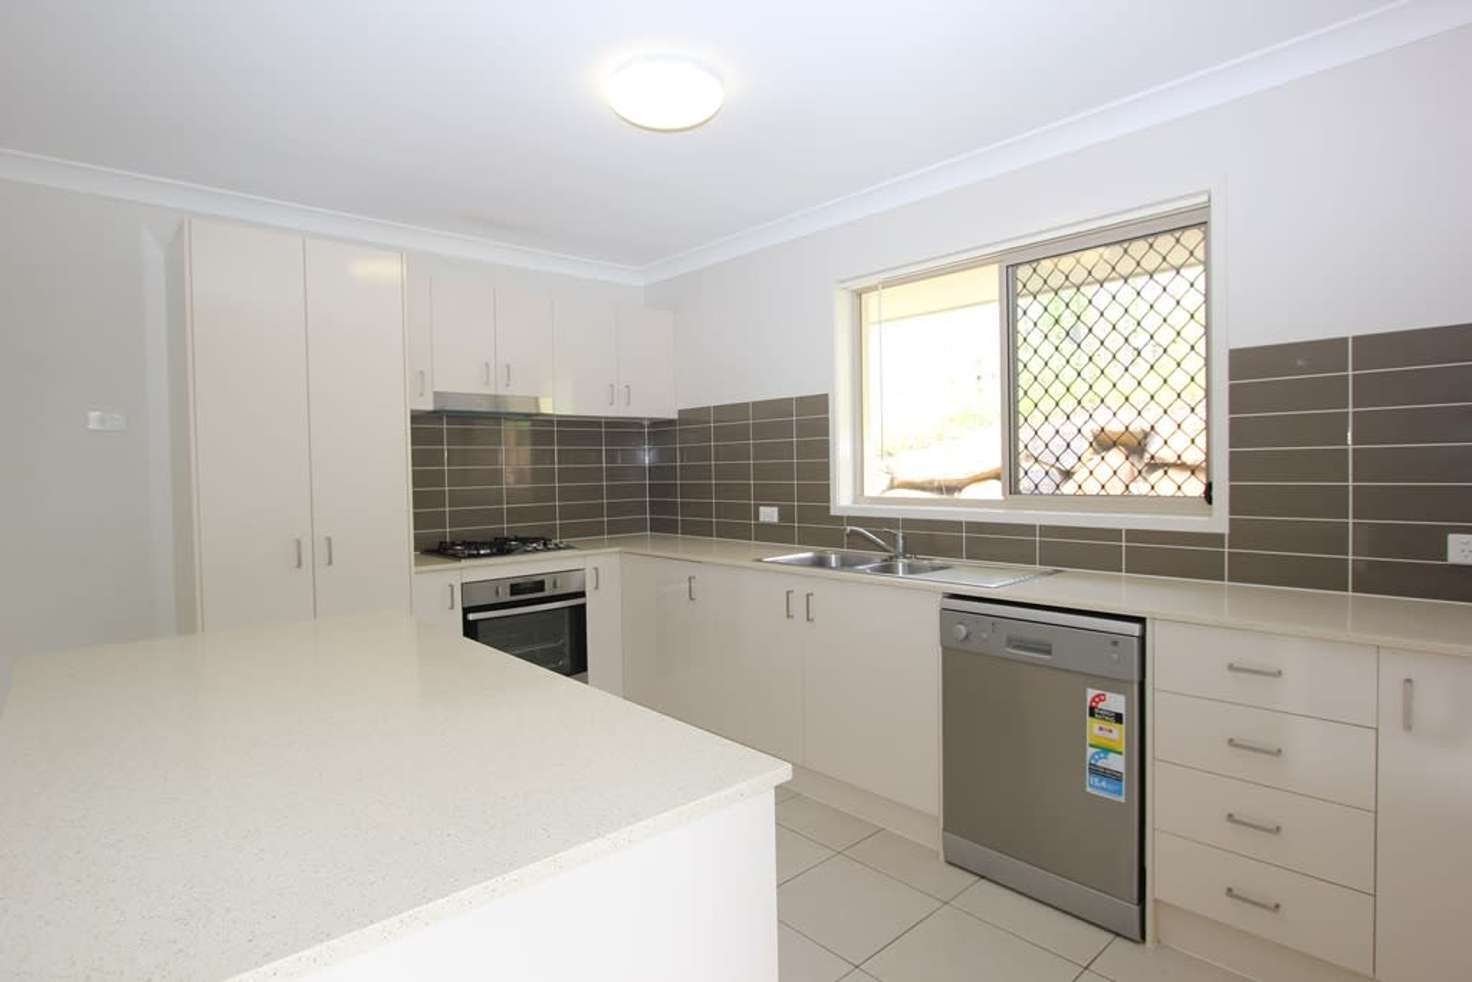 Main view of Homely house listing, 10 Highvale Court, Bahrs Scrub QLD 4207